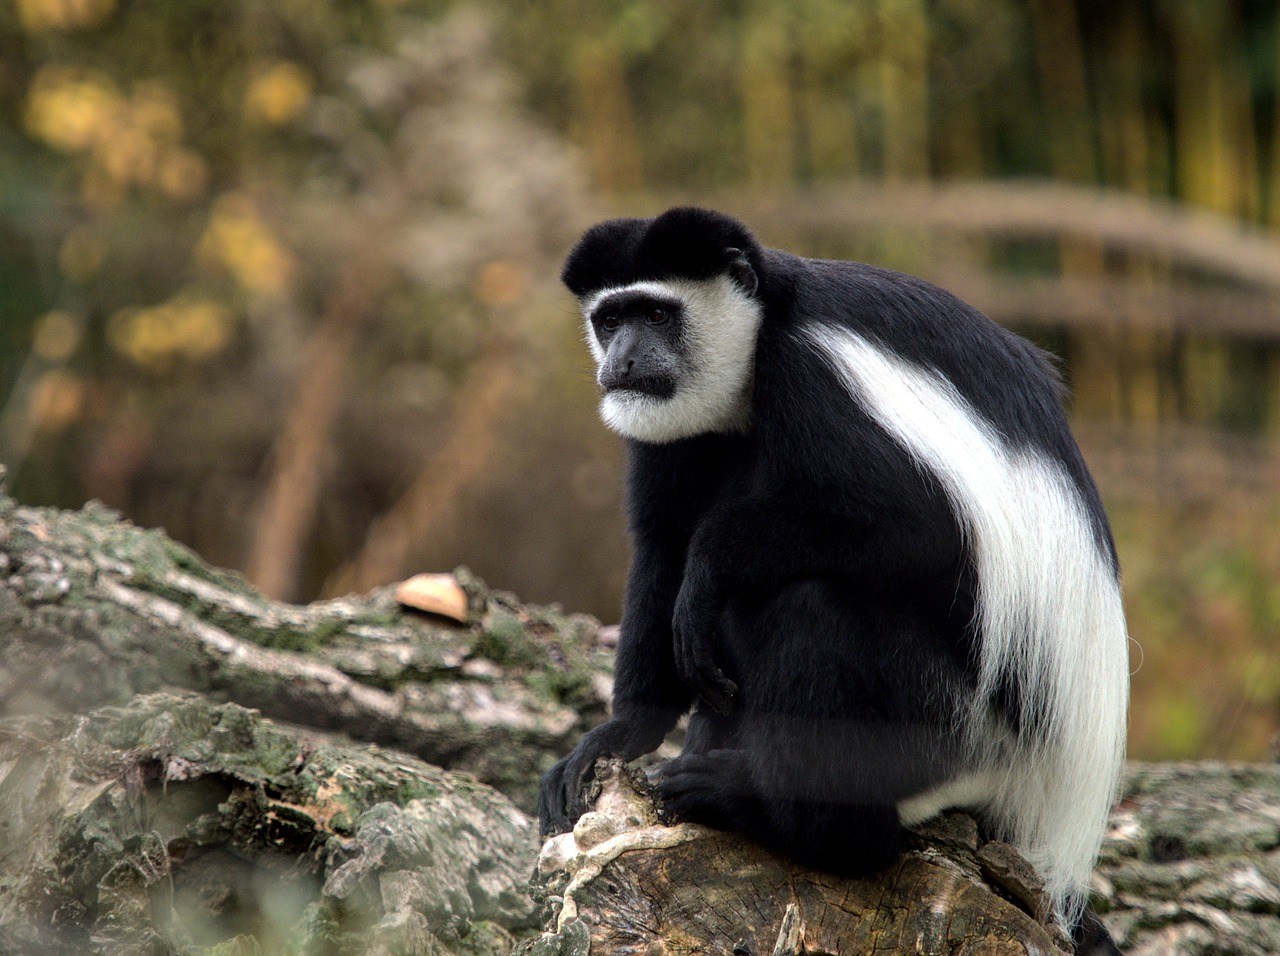 Colobus monkey in The Gambia